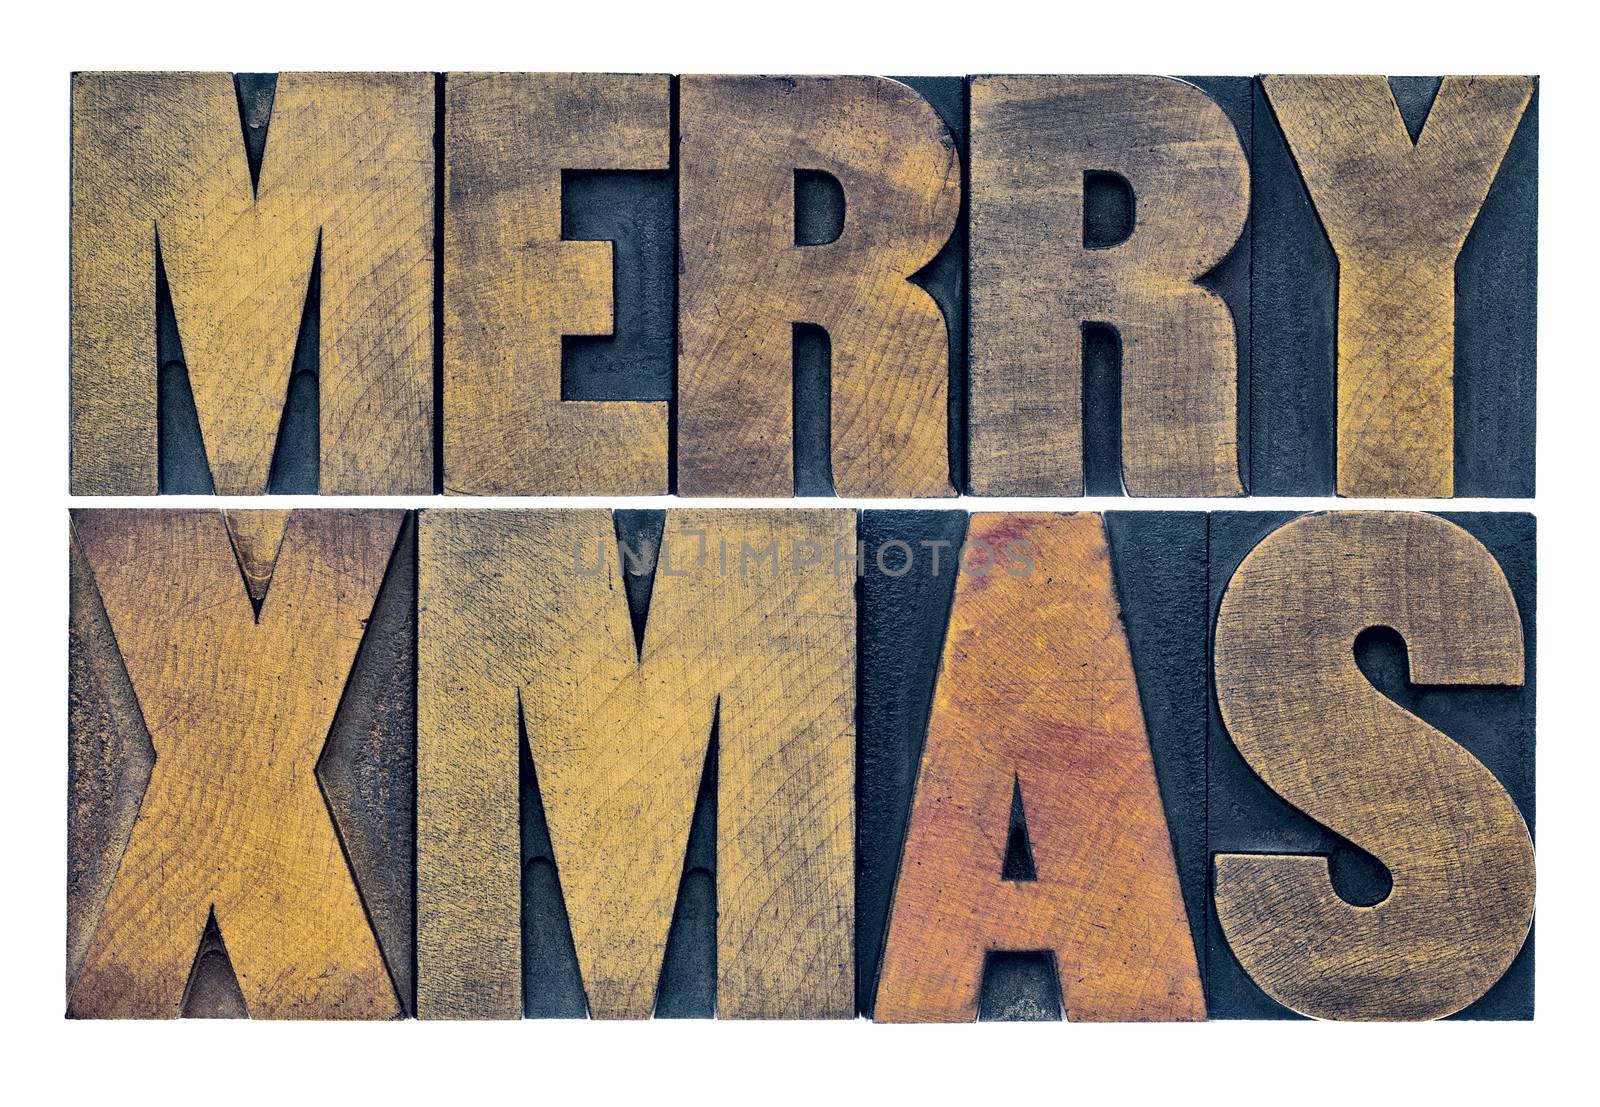 Meyy Xmas typography greeting card by PixelsAway